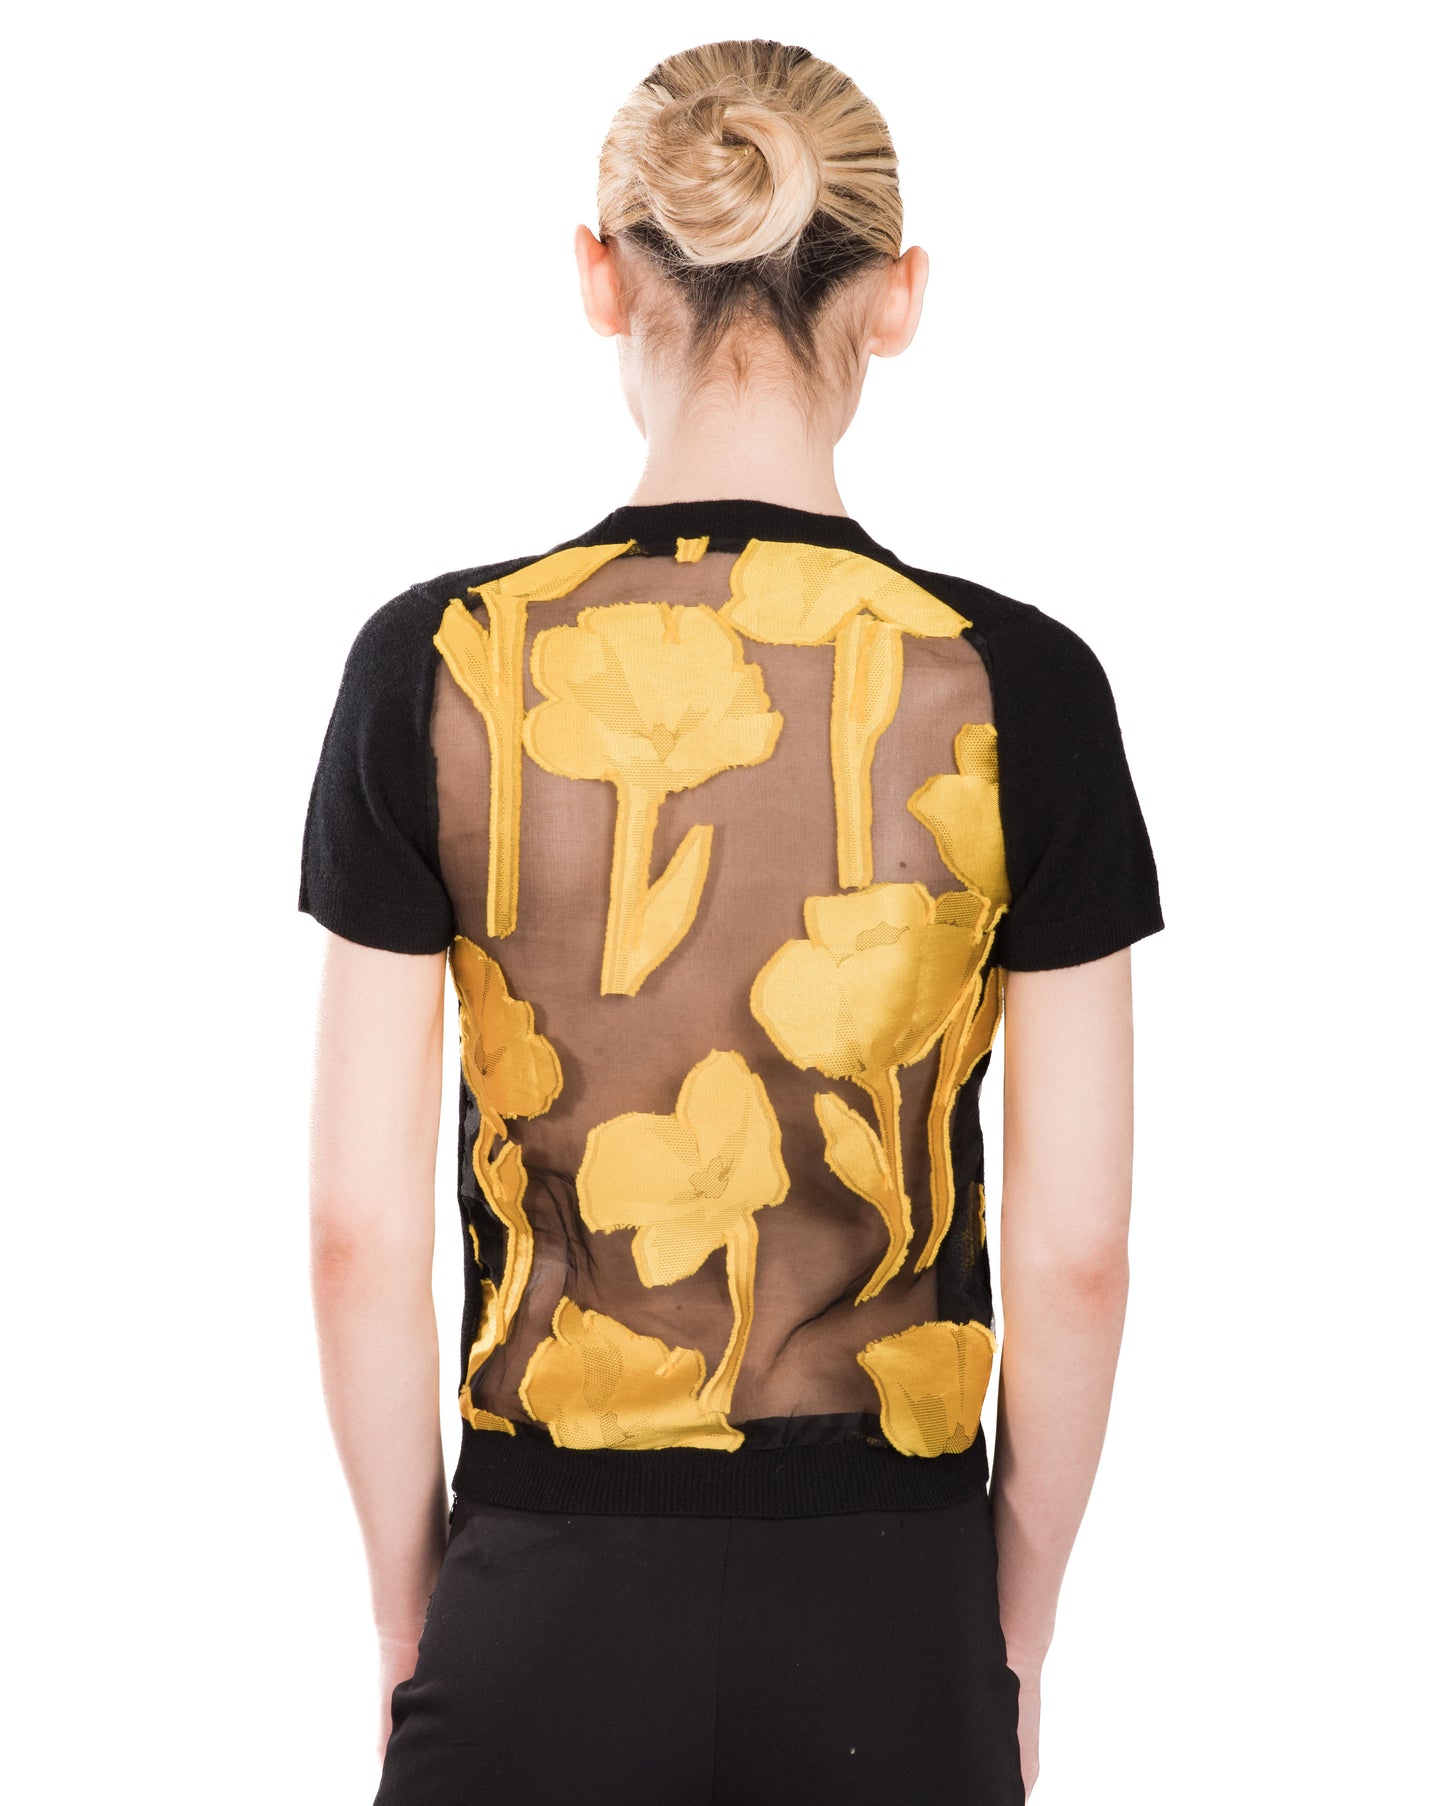 XS BLACK CREW NECK SHORT SLEEVE CASHMERE SWEATER WITH YELLOW DAMASK AFRICAN POPPIES ON BLACK SILK ORGANZA BACK WITH BLACK SILK ORGANZA LINING